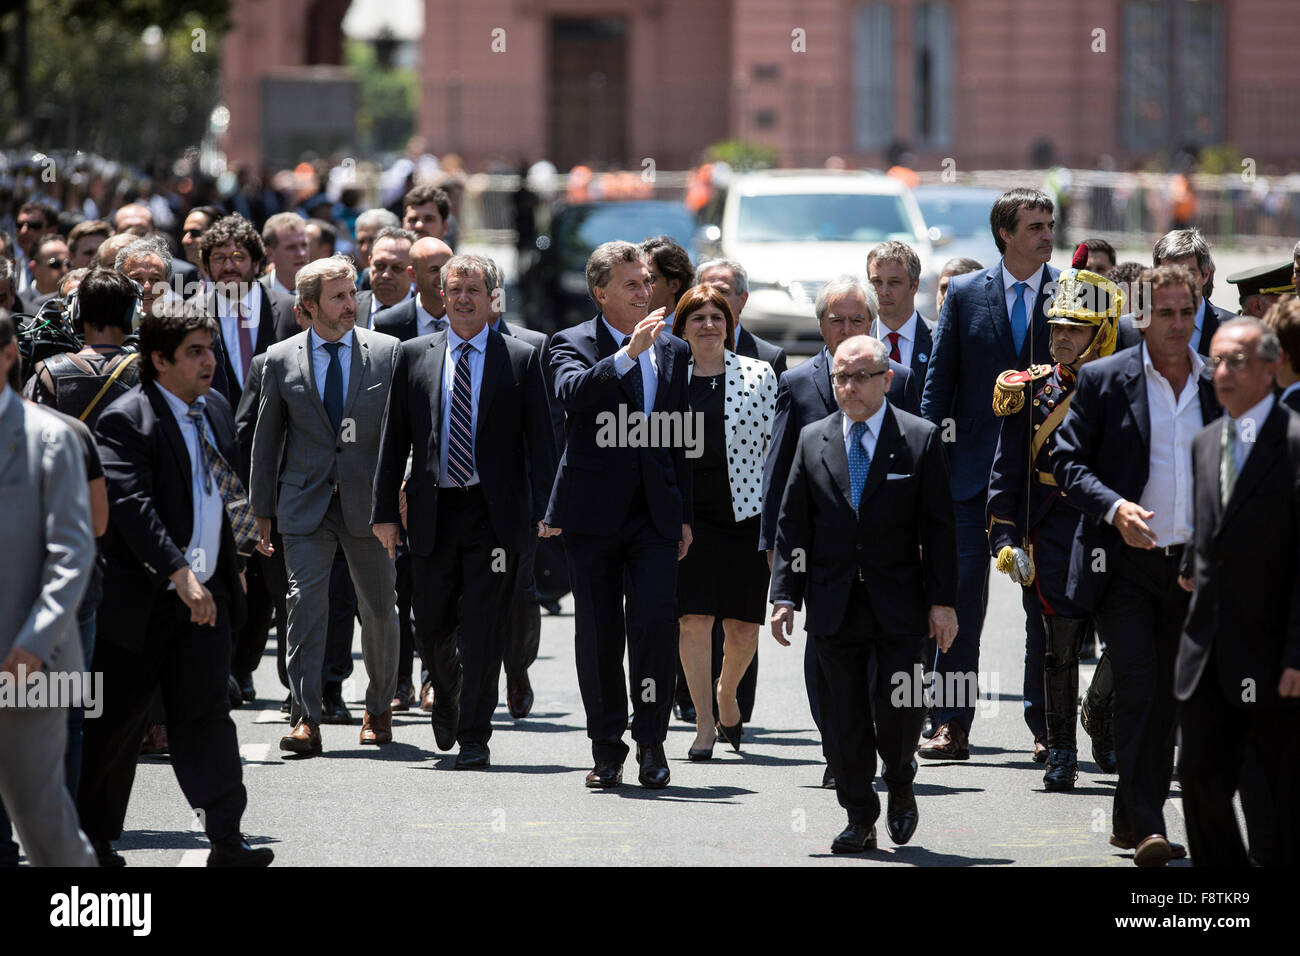 Buenos Aires, Argentina. 11th Dec, 2015. Argentina's President Mauricio Macri (C) walks on May Avenue with his Cabinet to participate in the Tedeum at the Metropolitan Cathedral in Buenos Aires, capital of Argentina, Dec. 11, 2015. According to local press, Mauricio Macri Friday attended the traditional religious service at the Metropolital Cathedral, one day after his pesidential inauguration. Credit:  Martin Zabala/Xinhua/Alamy Live News Stock Photo